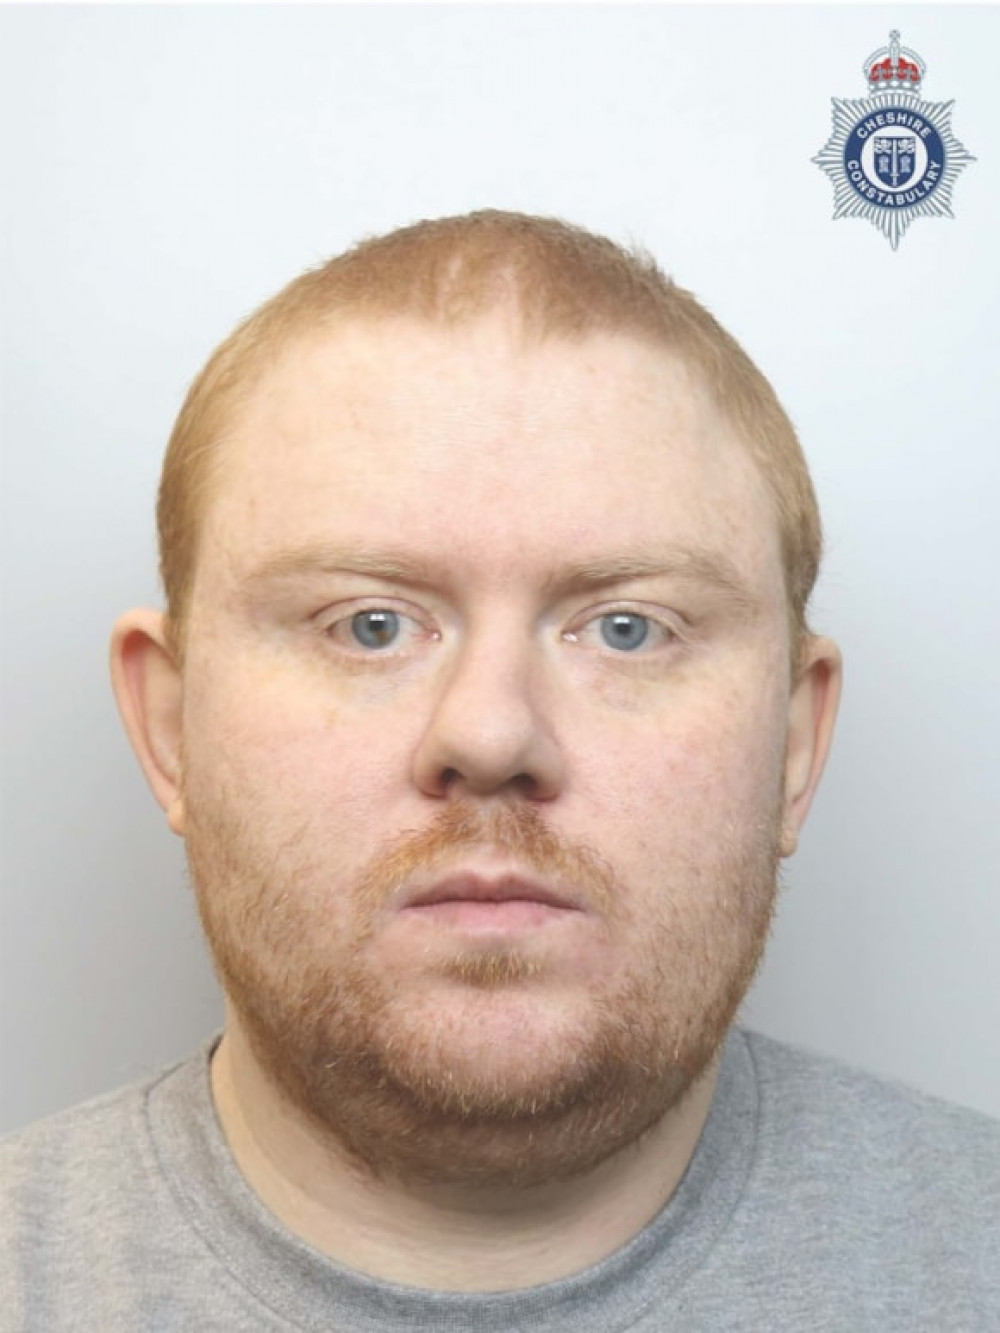 Nicholas Hatton, 34, of West Street, was sentenced to 18 years in prison on Tuesday 16 April (Cheshire Police).